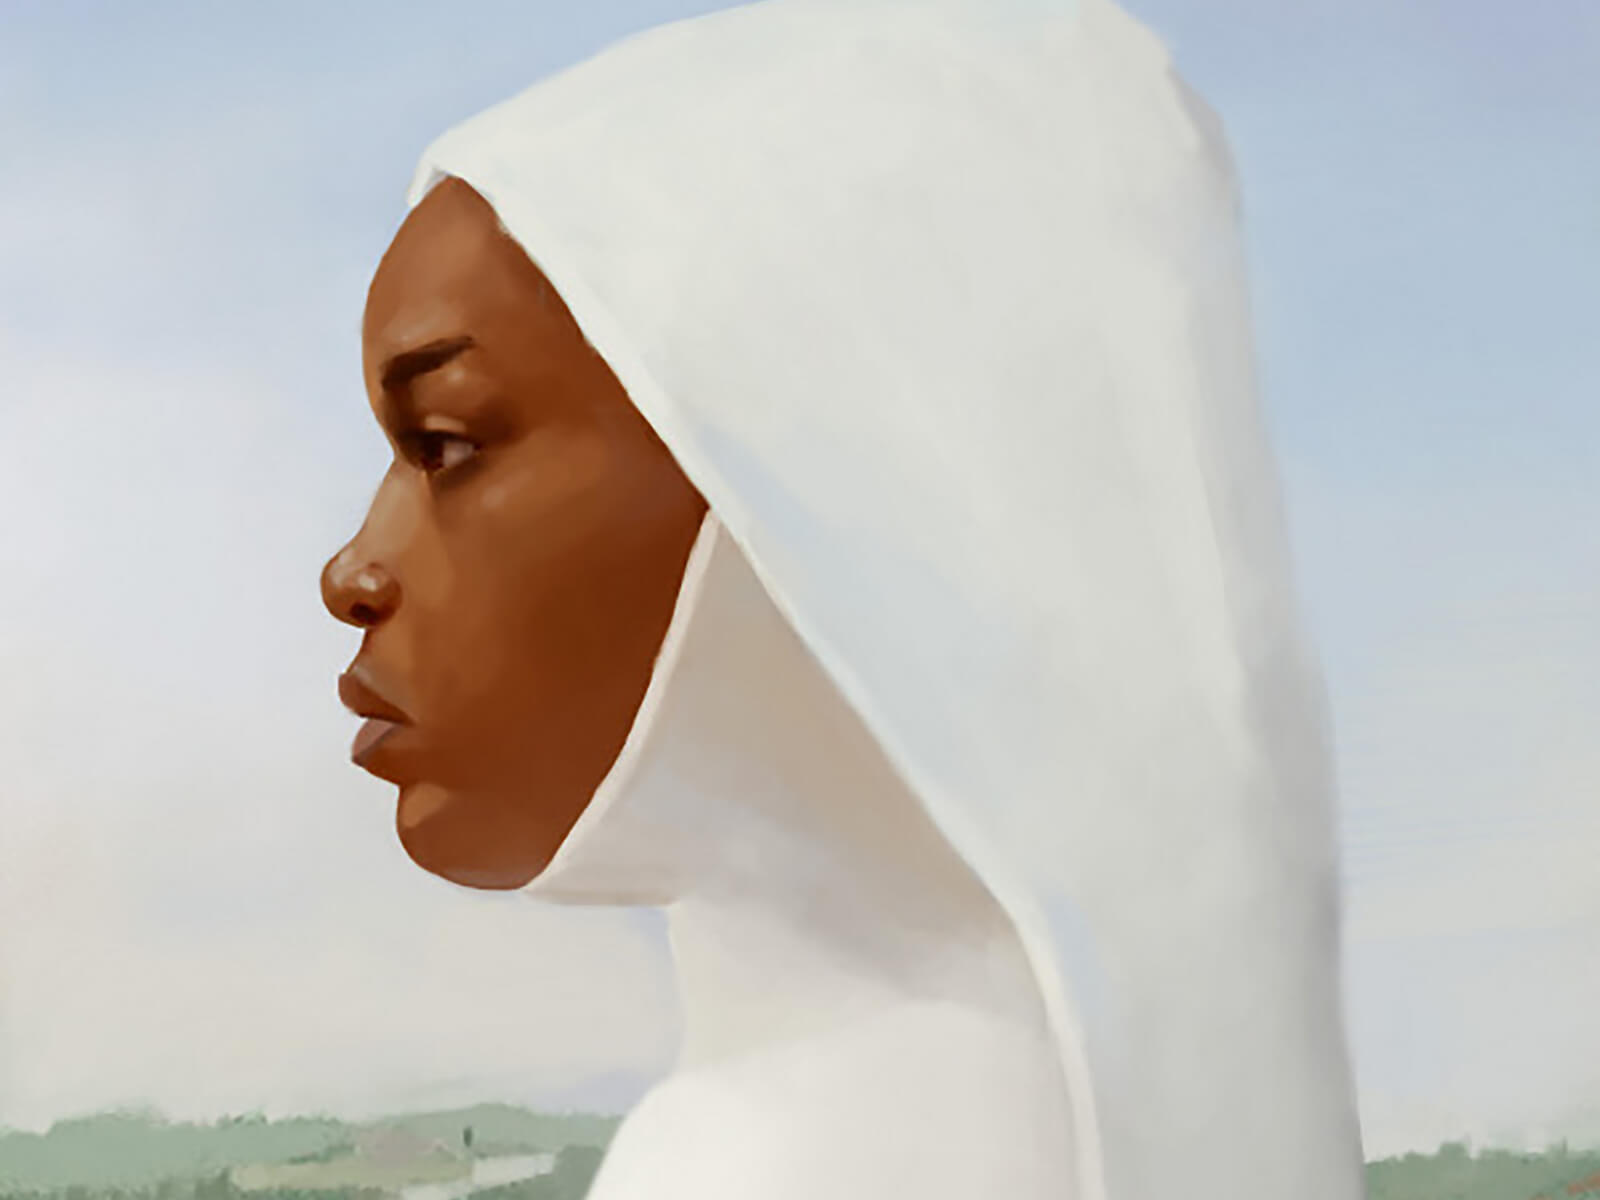 Traditional painting portrait of a woman in a white nun-like outfit in profile